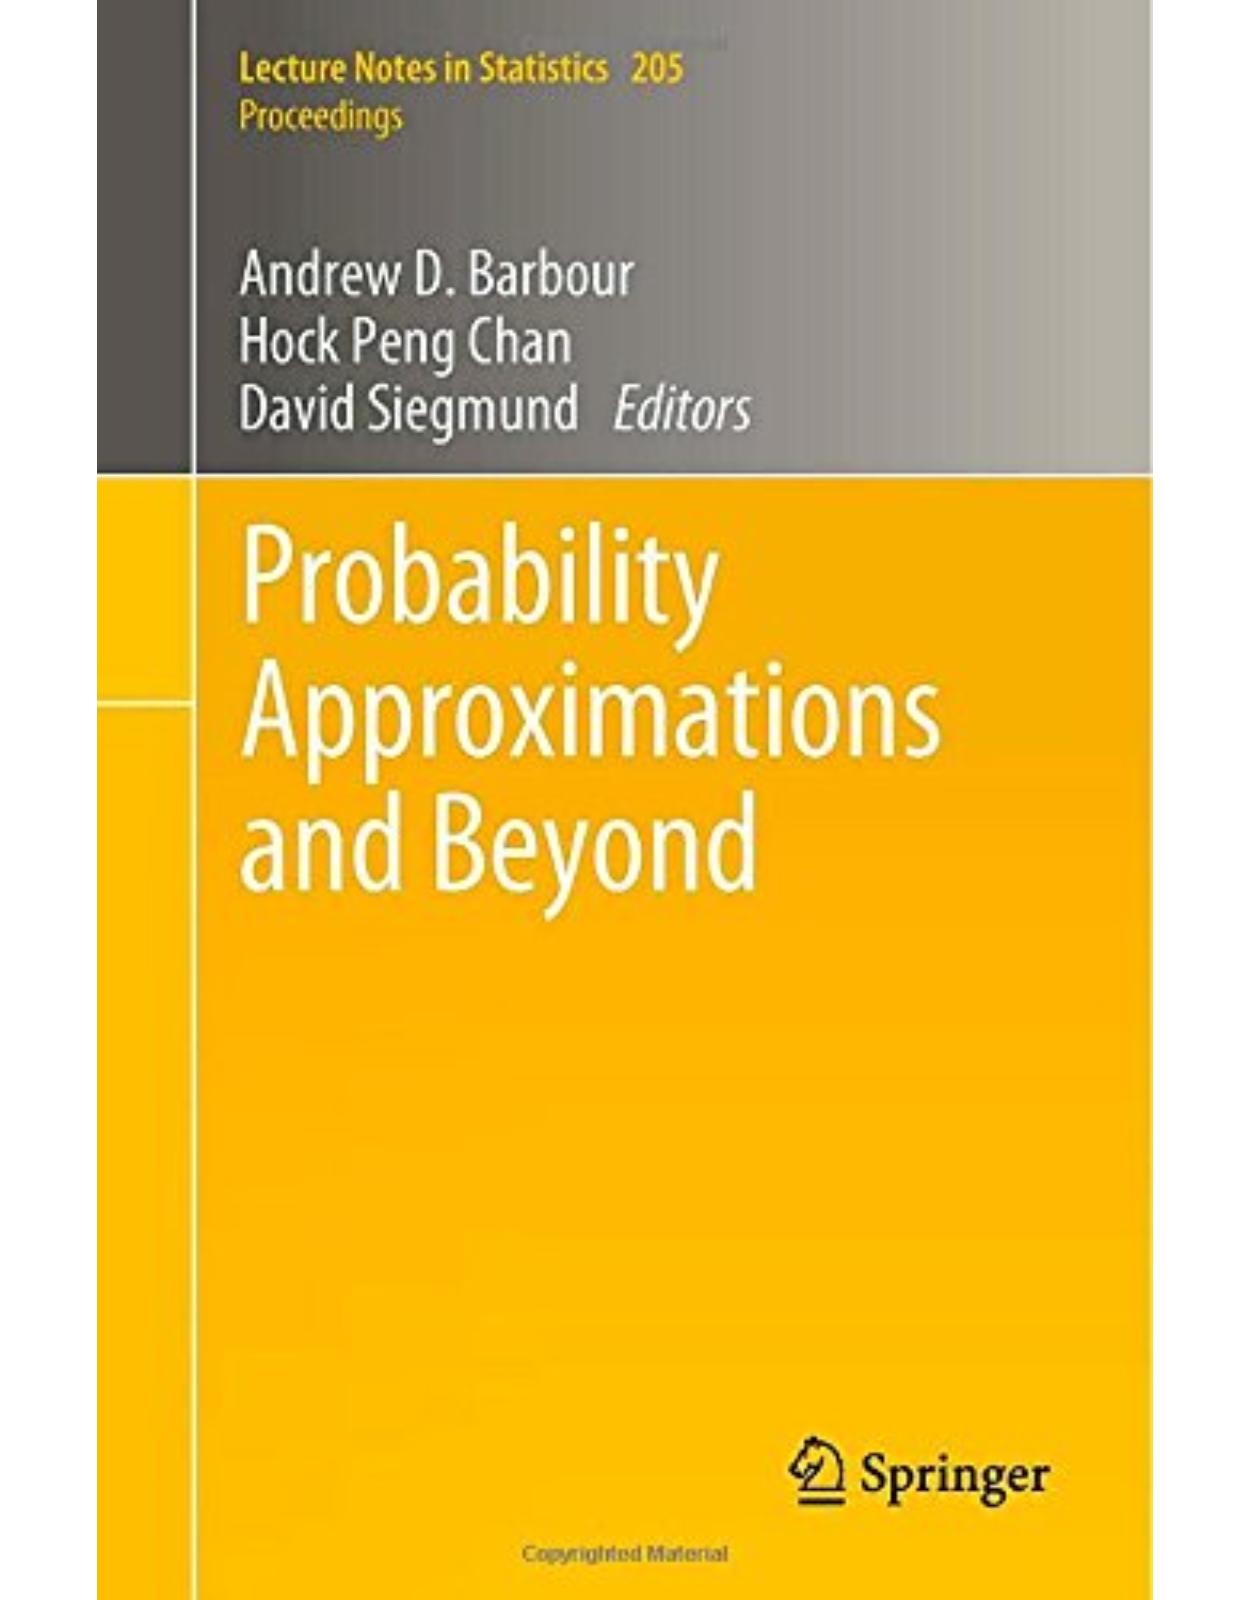 Probability Approximations and Beyond: 205 (Lecture Notes in Statistics / Lecture Notes in Statistics - Proceedings) 